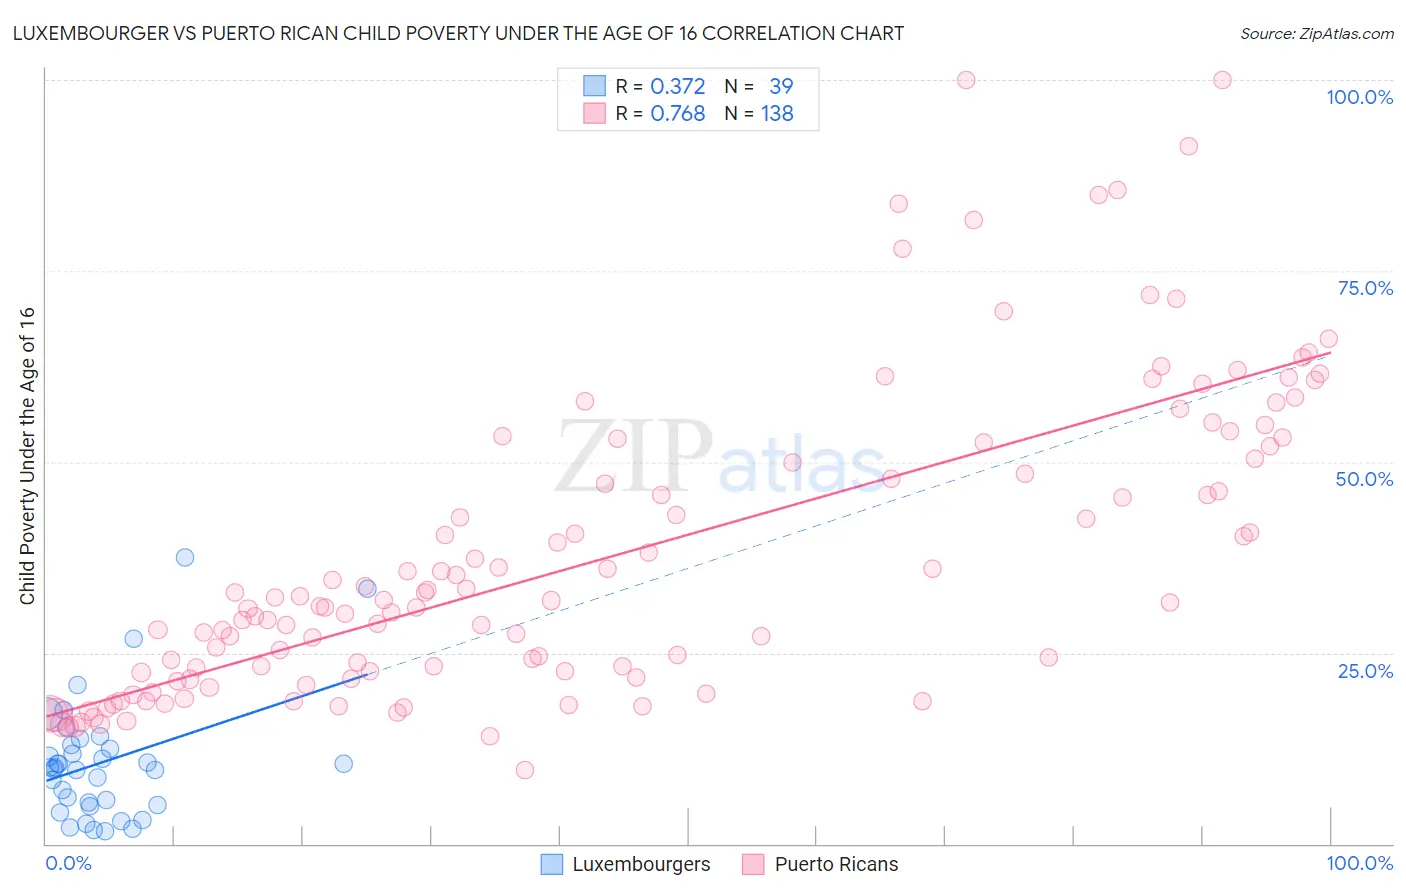 Luxembourger vs Puerto Rican Child Poverty Under the Age of 16